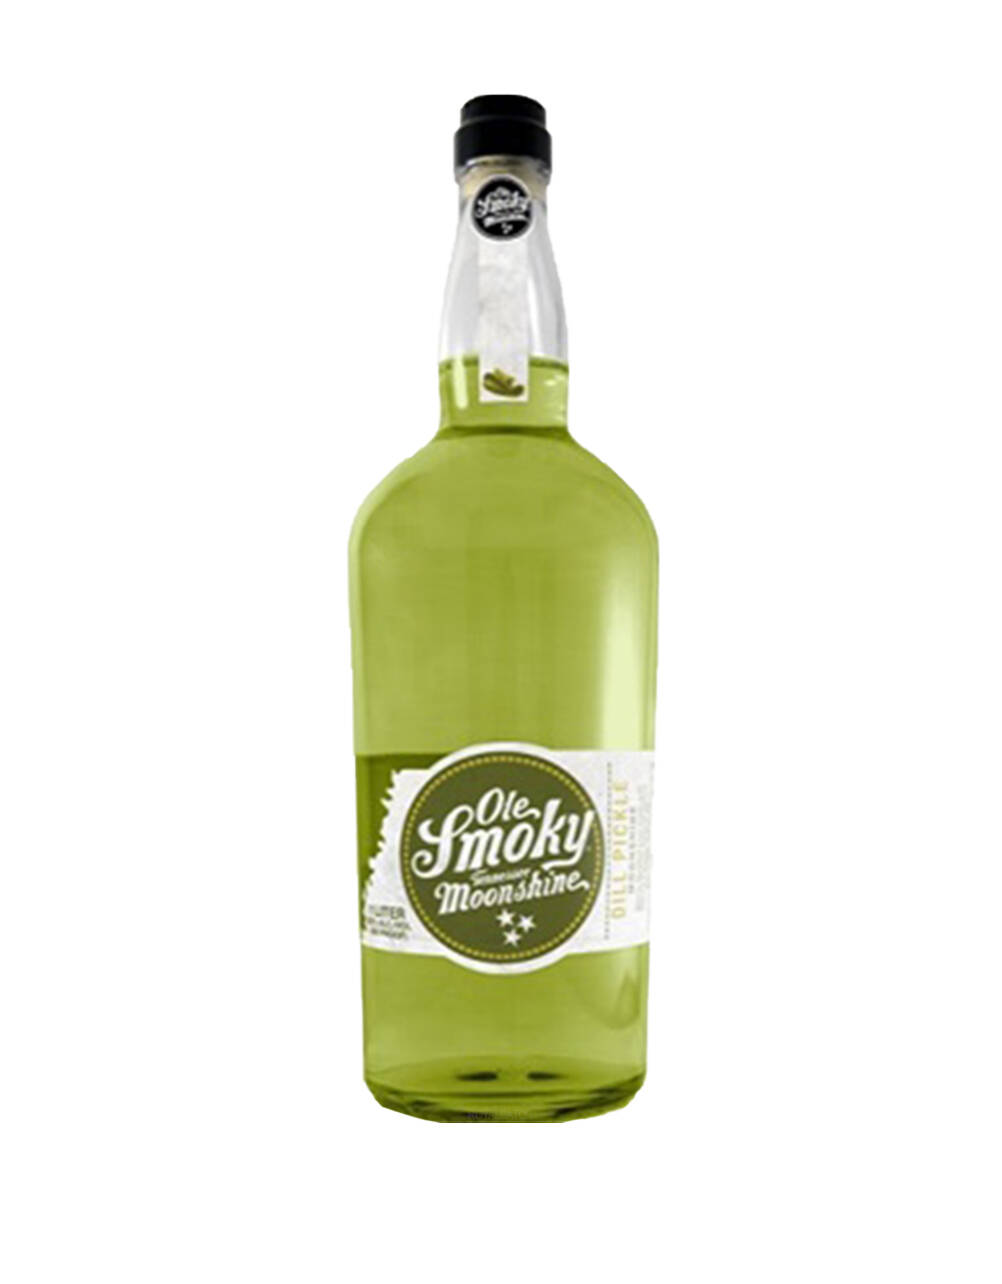 Ole Smoky Dill Pickle Moonshine 1L